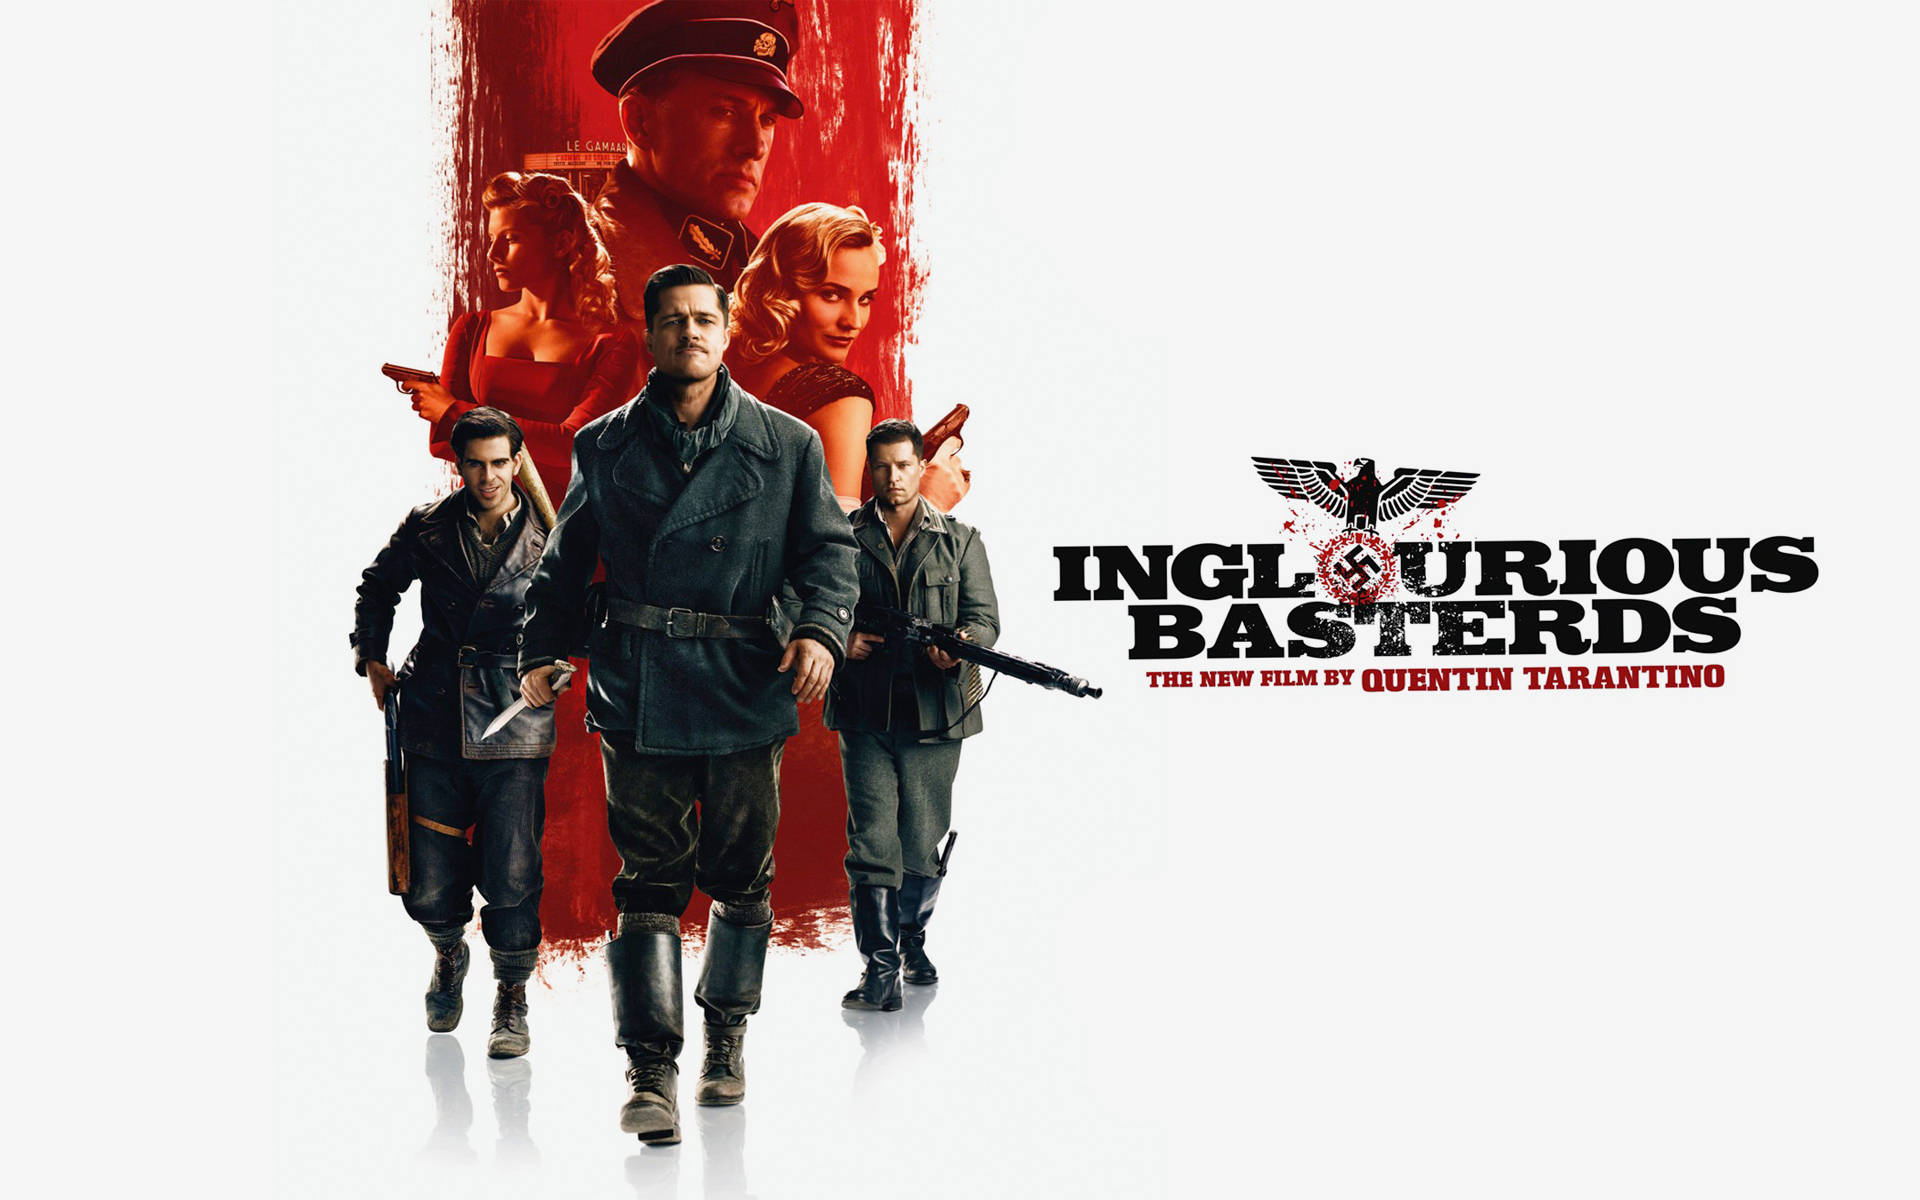 Inglourious Basterds Theatrical Poster Wallpaper